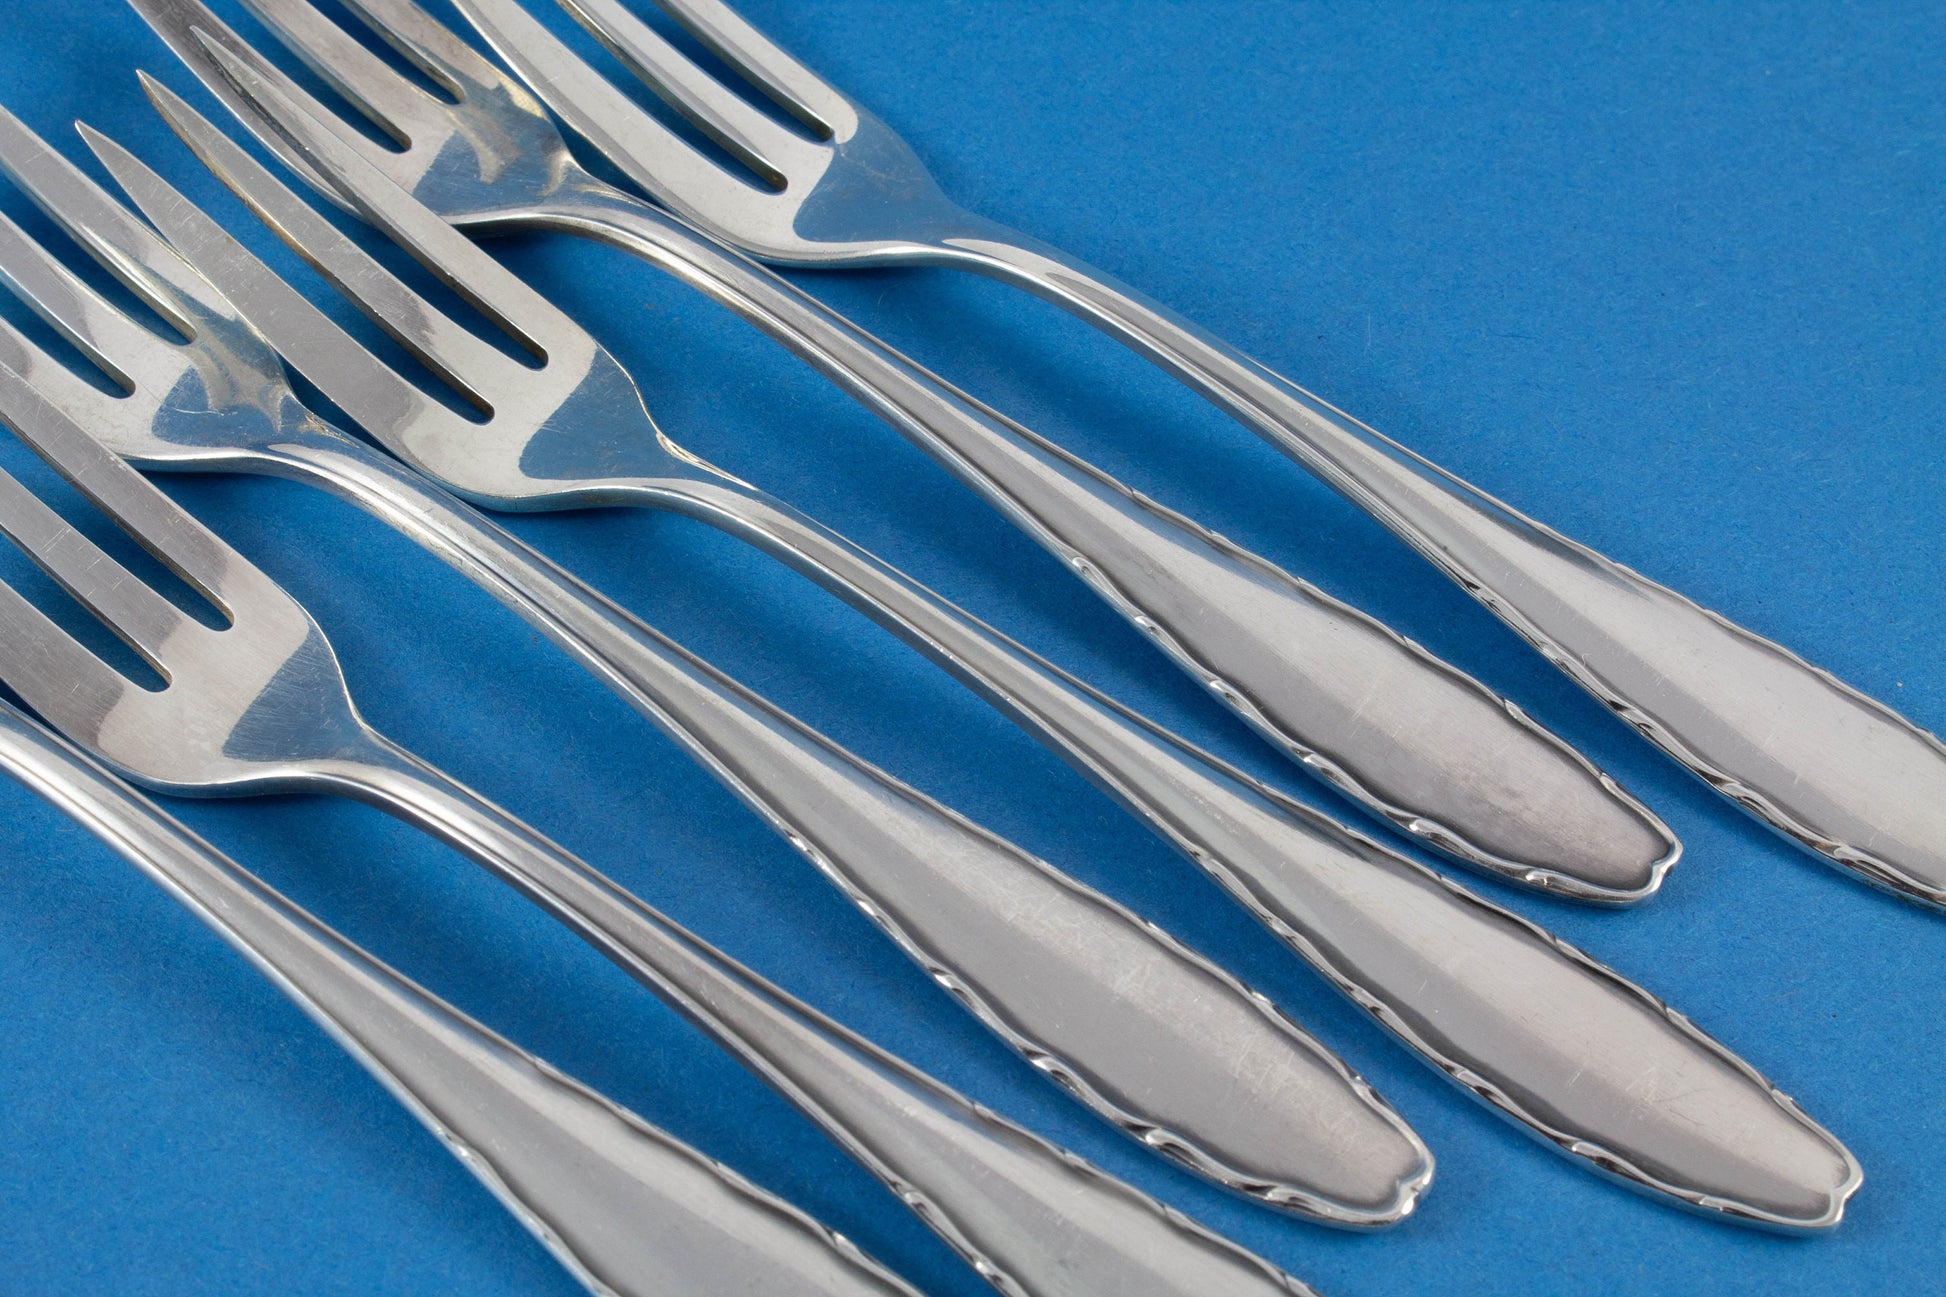 6 beautiful cake forks from WMF, WMF 2300